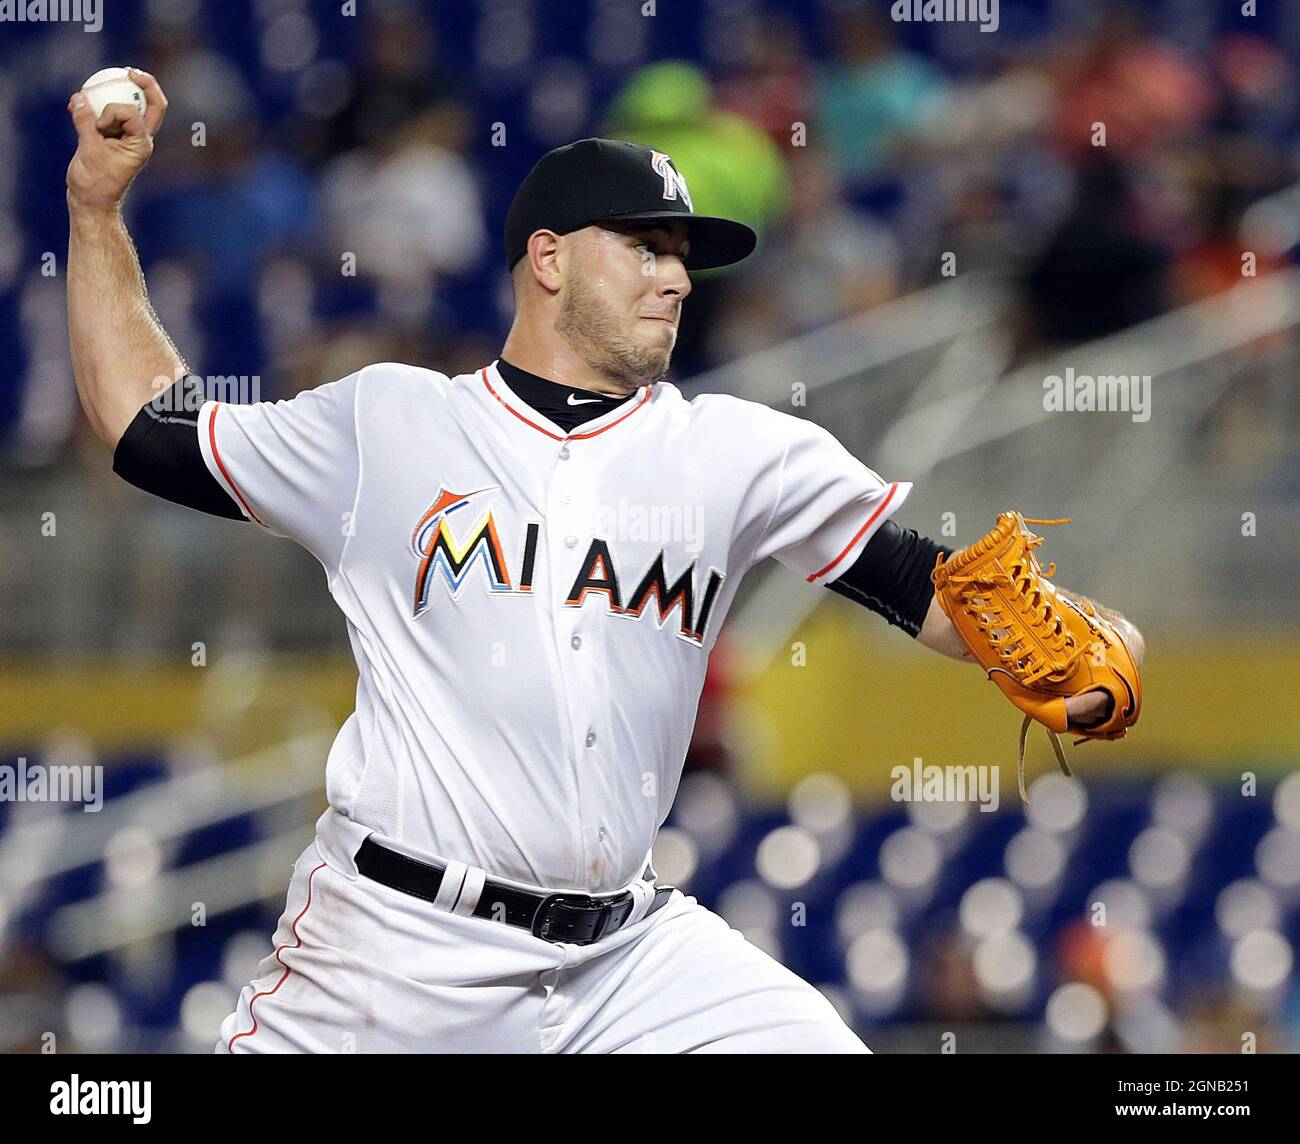 Miami, USA. 09th Sep, 2016. The Miami Marlins' Jose Fernandez pitches in the first inning against the Los Angeles Dodgers at Marlins Park in Miami, Florida on Thursday, September 9, 2016. (Photo by Pedro Portal/Miami Herald/TNS/Sipa USA) Credit: Sipa USA/Alamy Live News Stock Photo